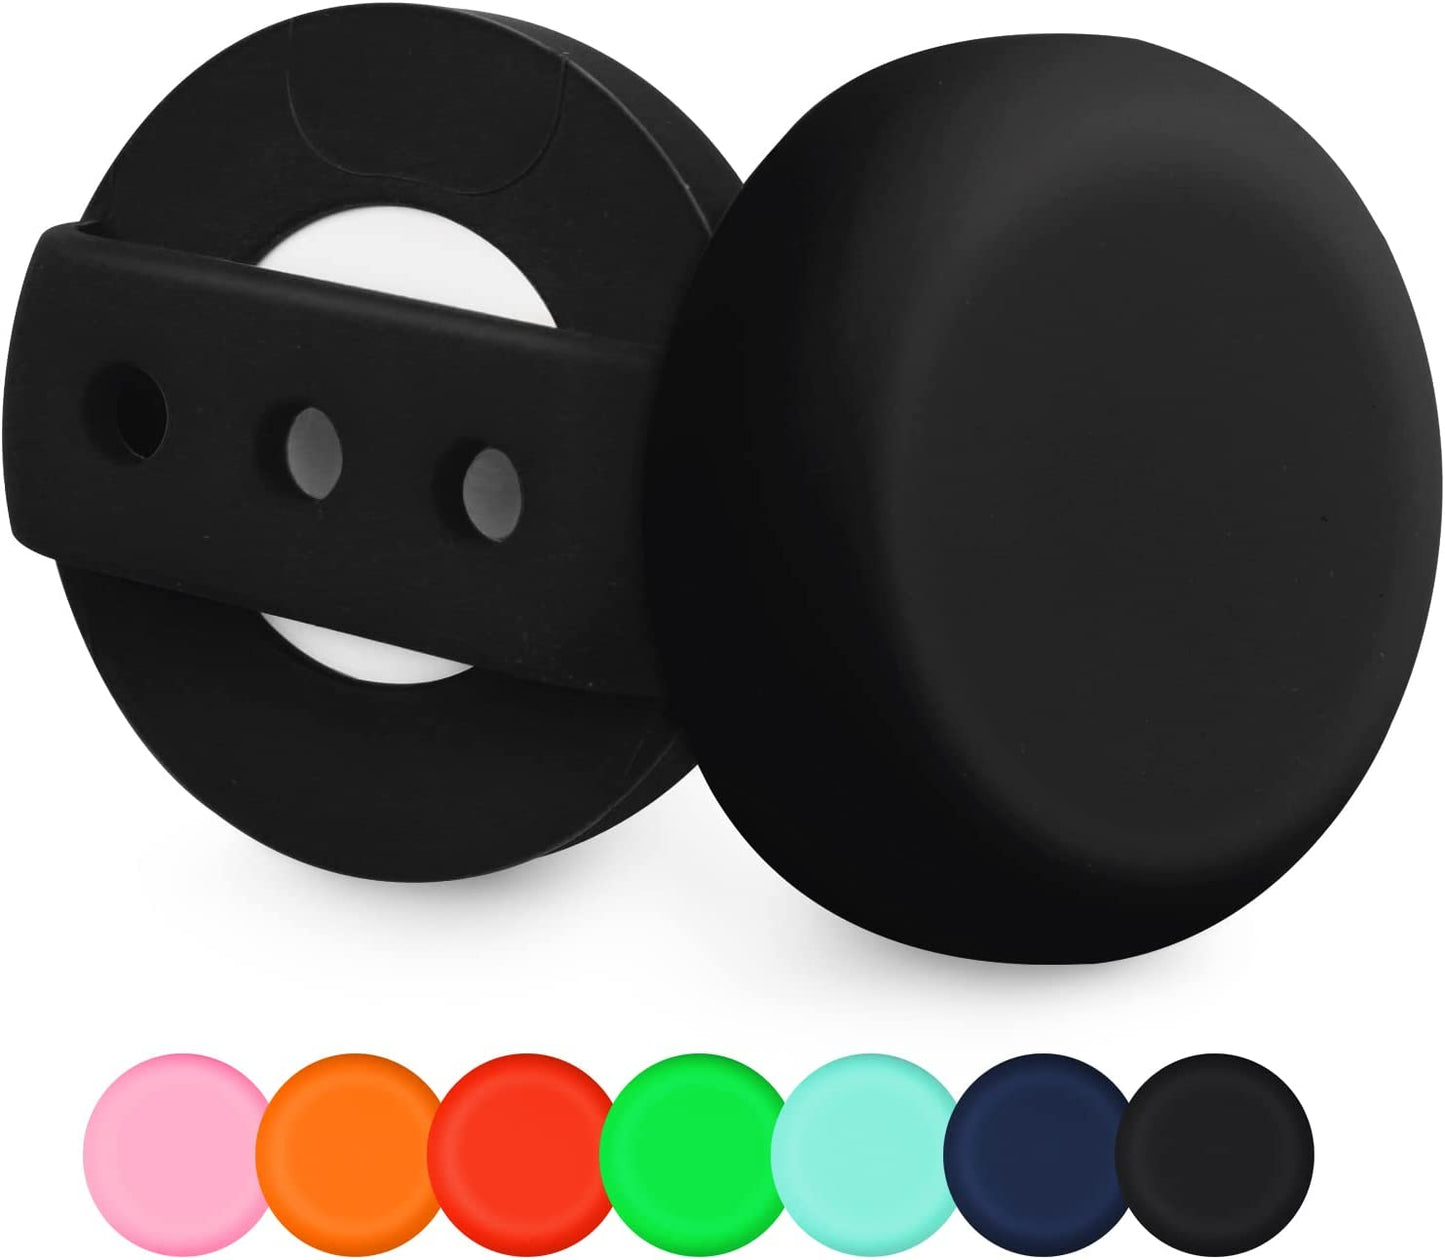 MOOGROU Airtag Dog Collar Holder 2 Pack,Newest Premium Protective Case for Apple Air Tag Tracker,Lightweight Silicone Airtag Case for Cat Collar Pet Loops,Waterproof Airtag.Dog Collar Holder Pink S Electronics > GPS Accessories > GPS Cases MOOGROU Black+Black L-3/4" 1" 